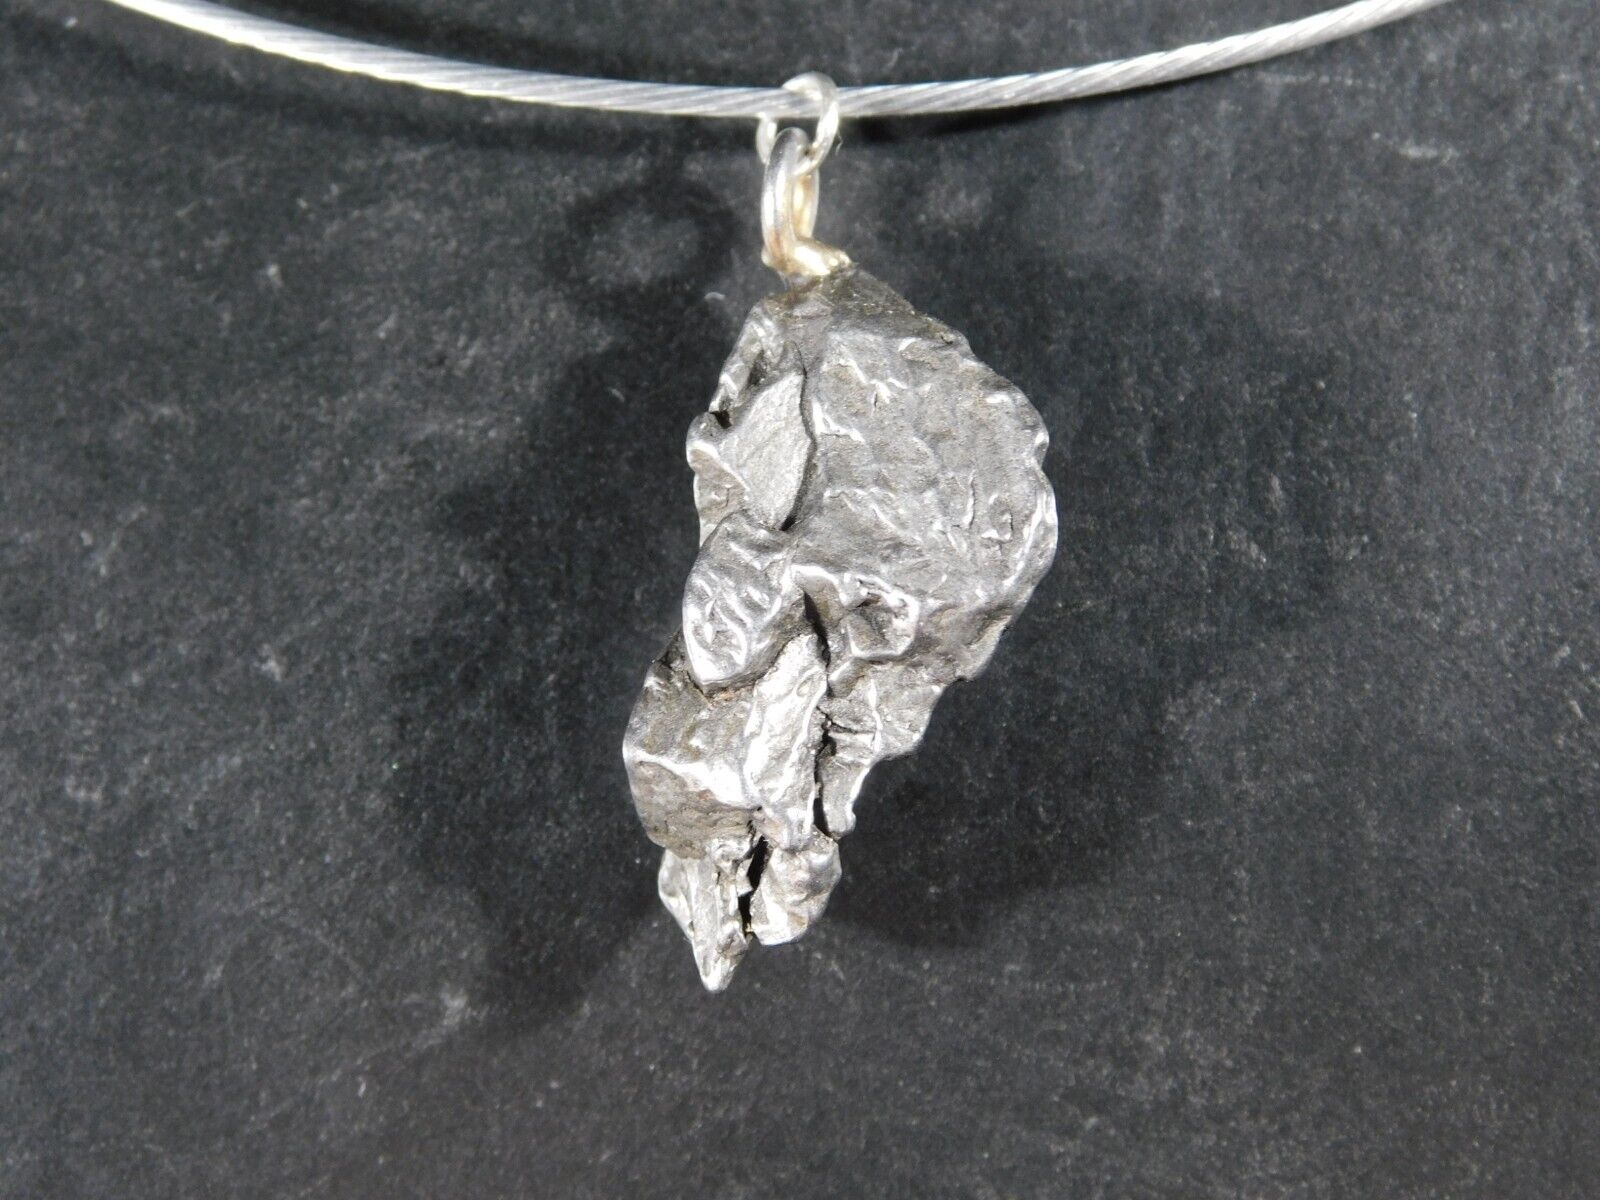 Authentic Meteorite Pendant or Necklace...a Falling Star 4.32